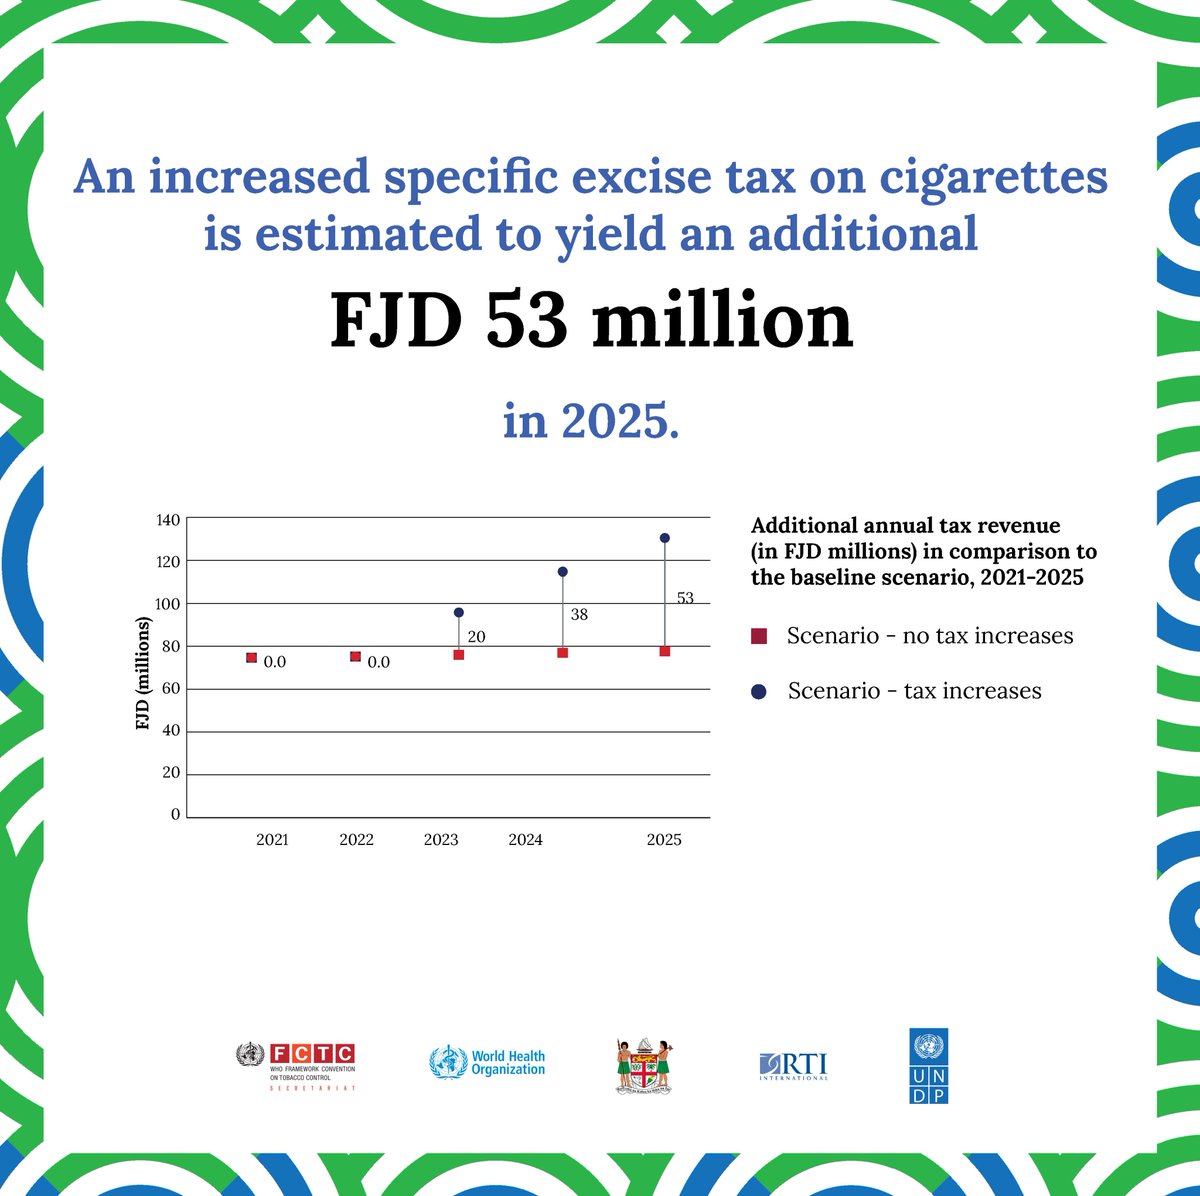 An introduced specific excise tax on cigarettes is estimated to yield an additional FJD 53 million in 2025. $$ Tobacco taxes in Fiji can RAISE ↑ government revenue and can be #invested in health! #investinhealth